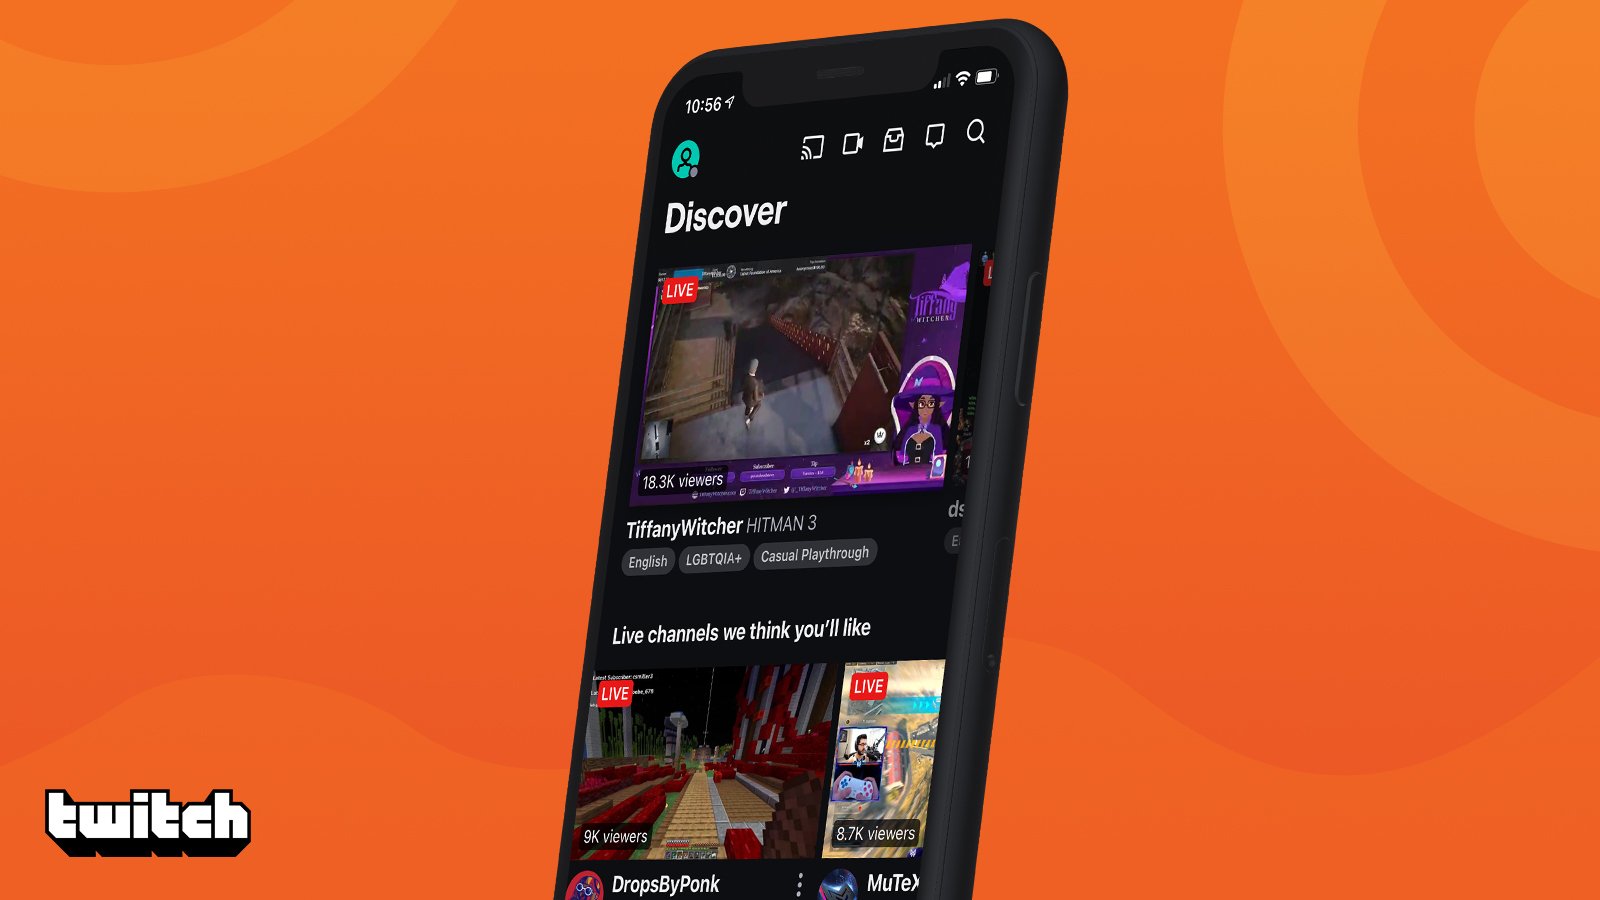 Streaming on Twitch? Here Are 10 Content Ideas Using iOS Devices